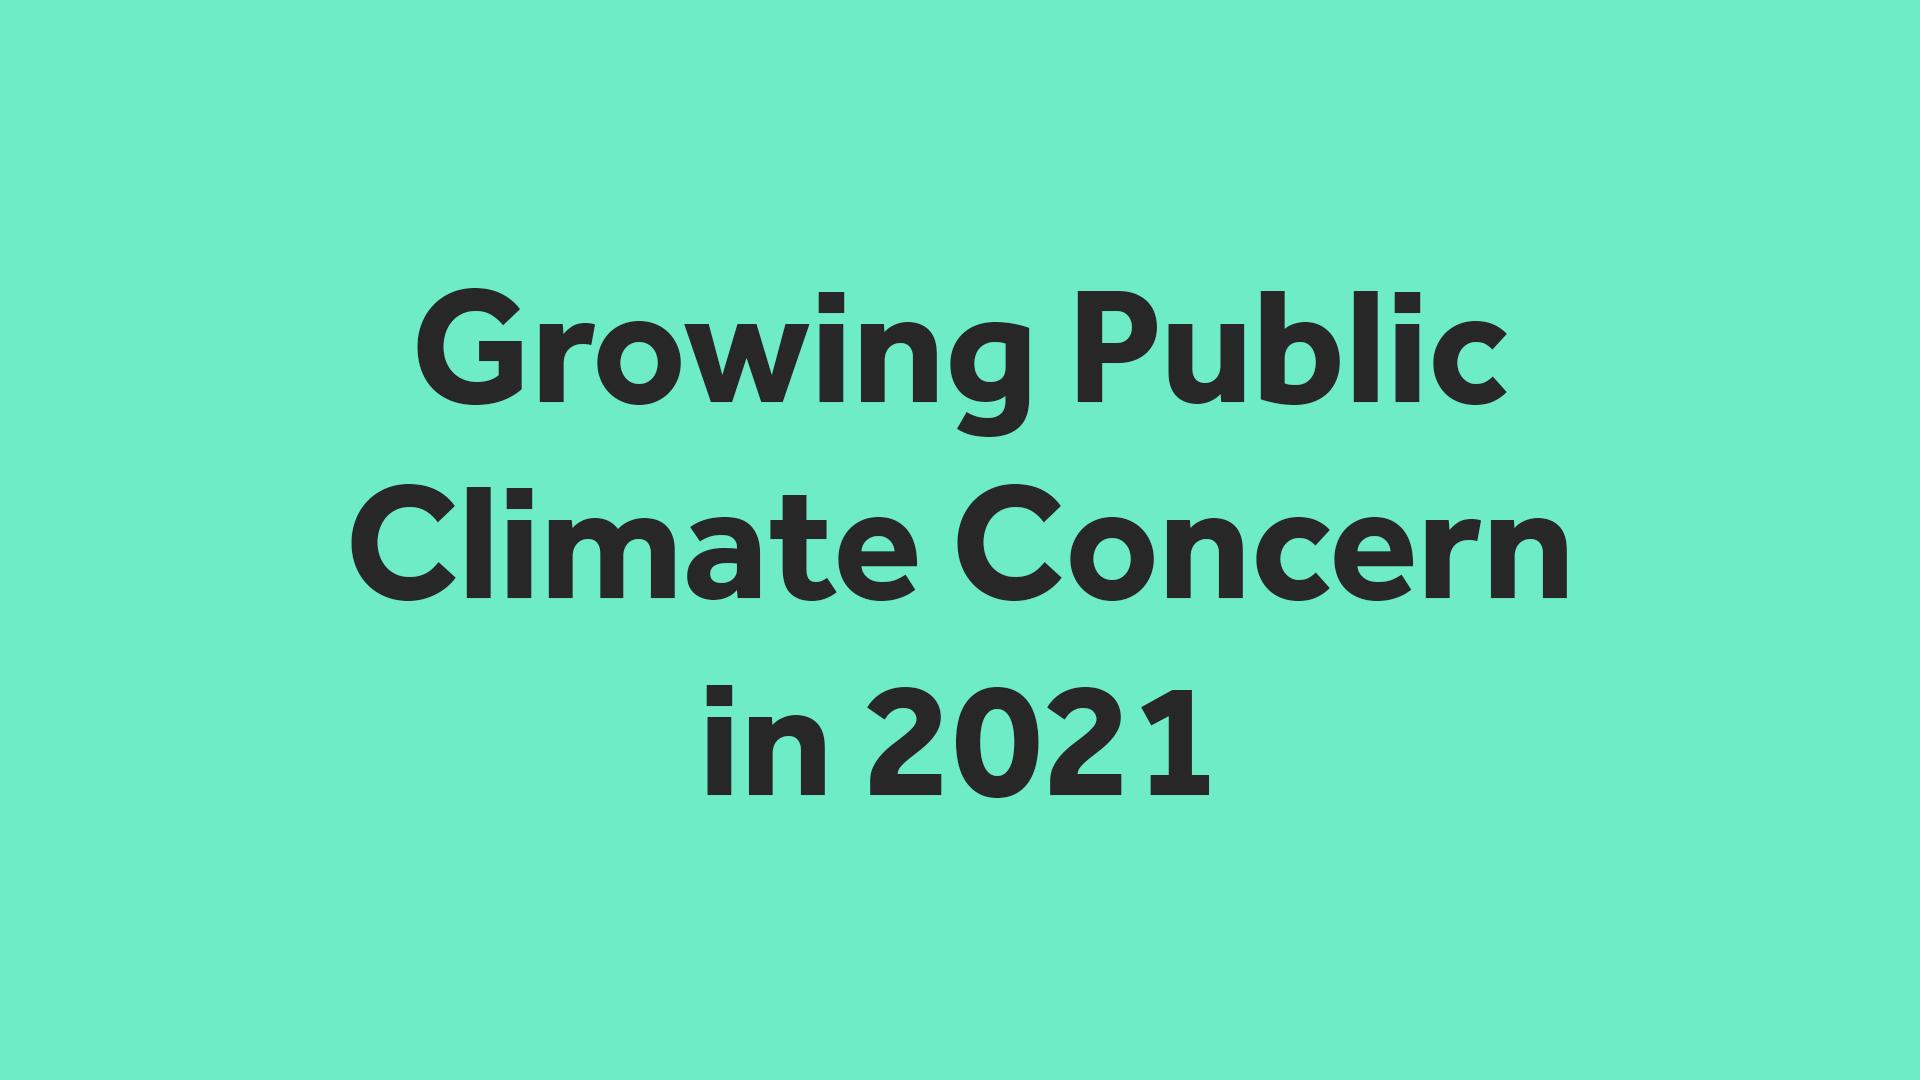 Growing Public Climate Concern in 2021 